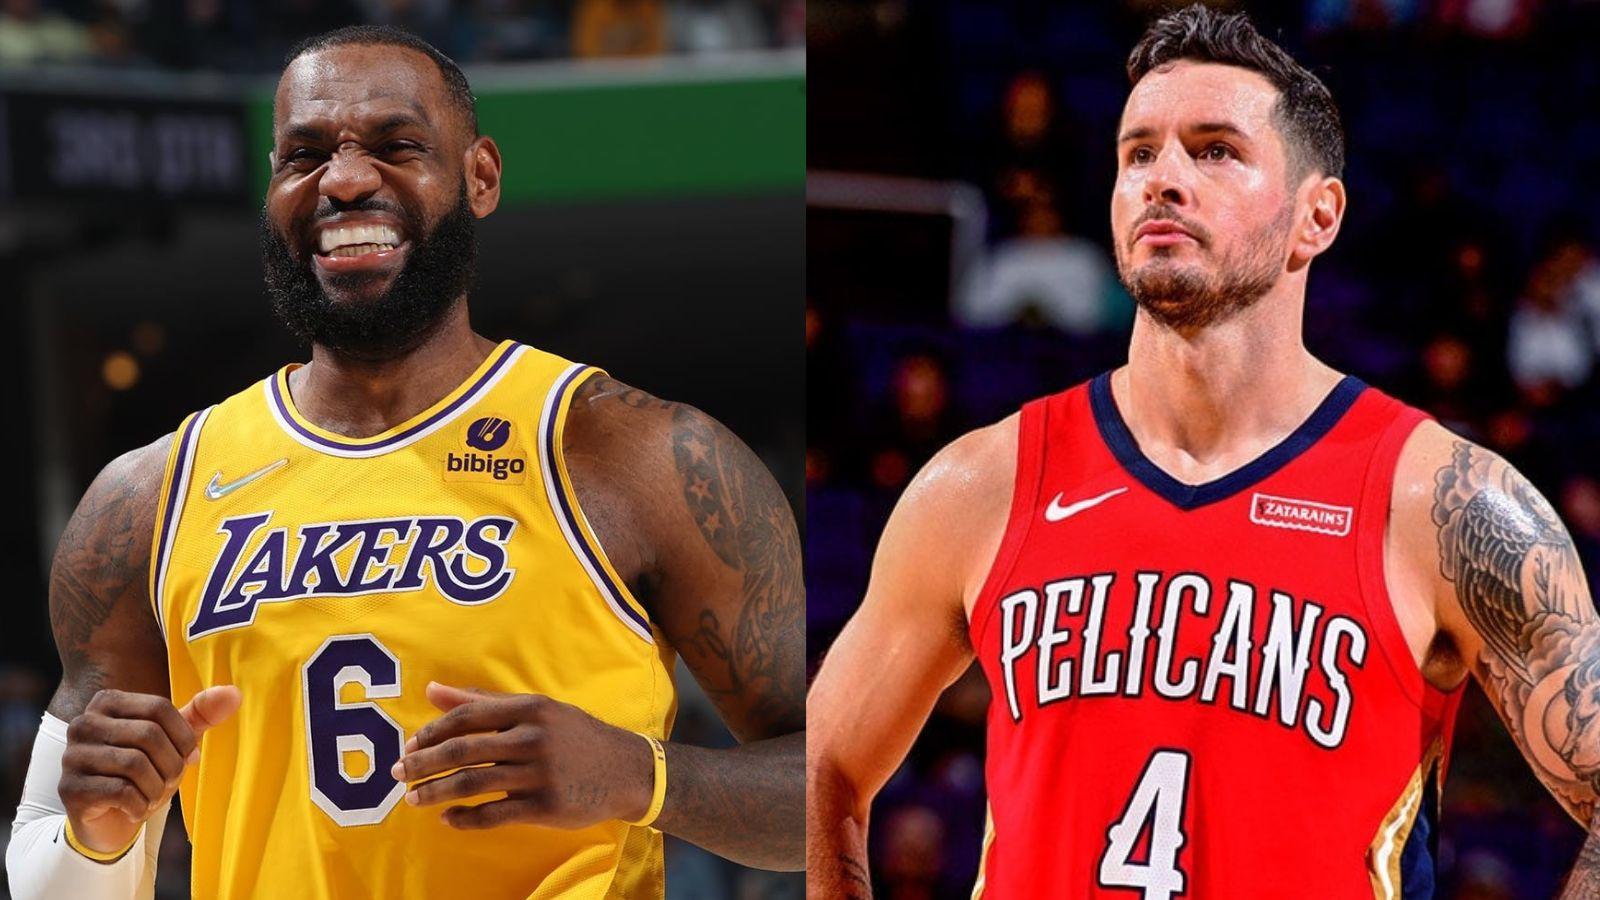 LeBron James as a member of the Los Angeles Lakers (left) and JJ Redick as a member of the New Orleans Pelicans (right).